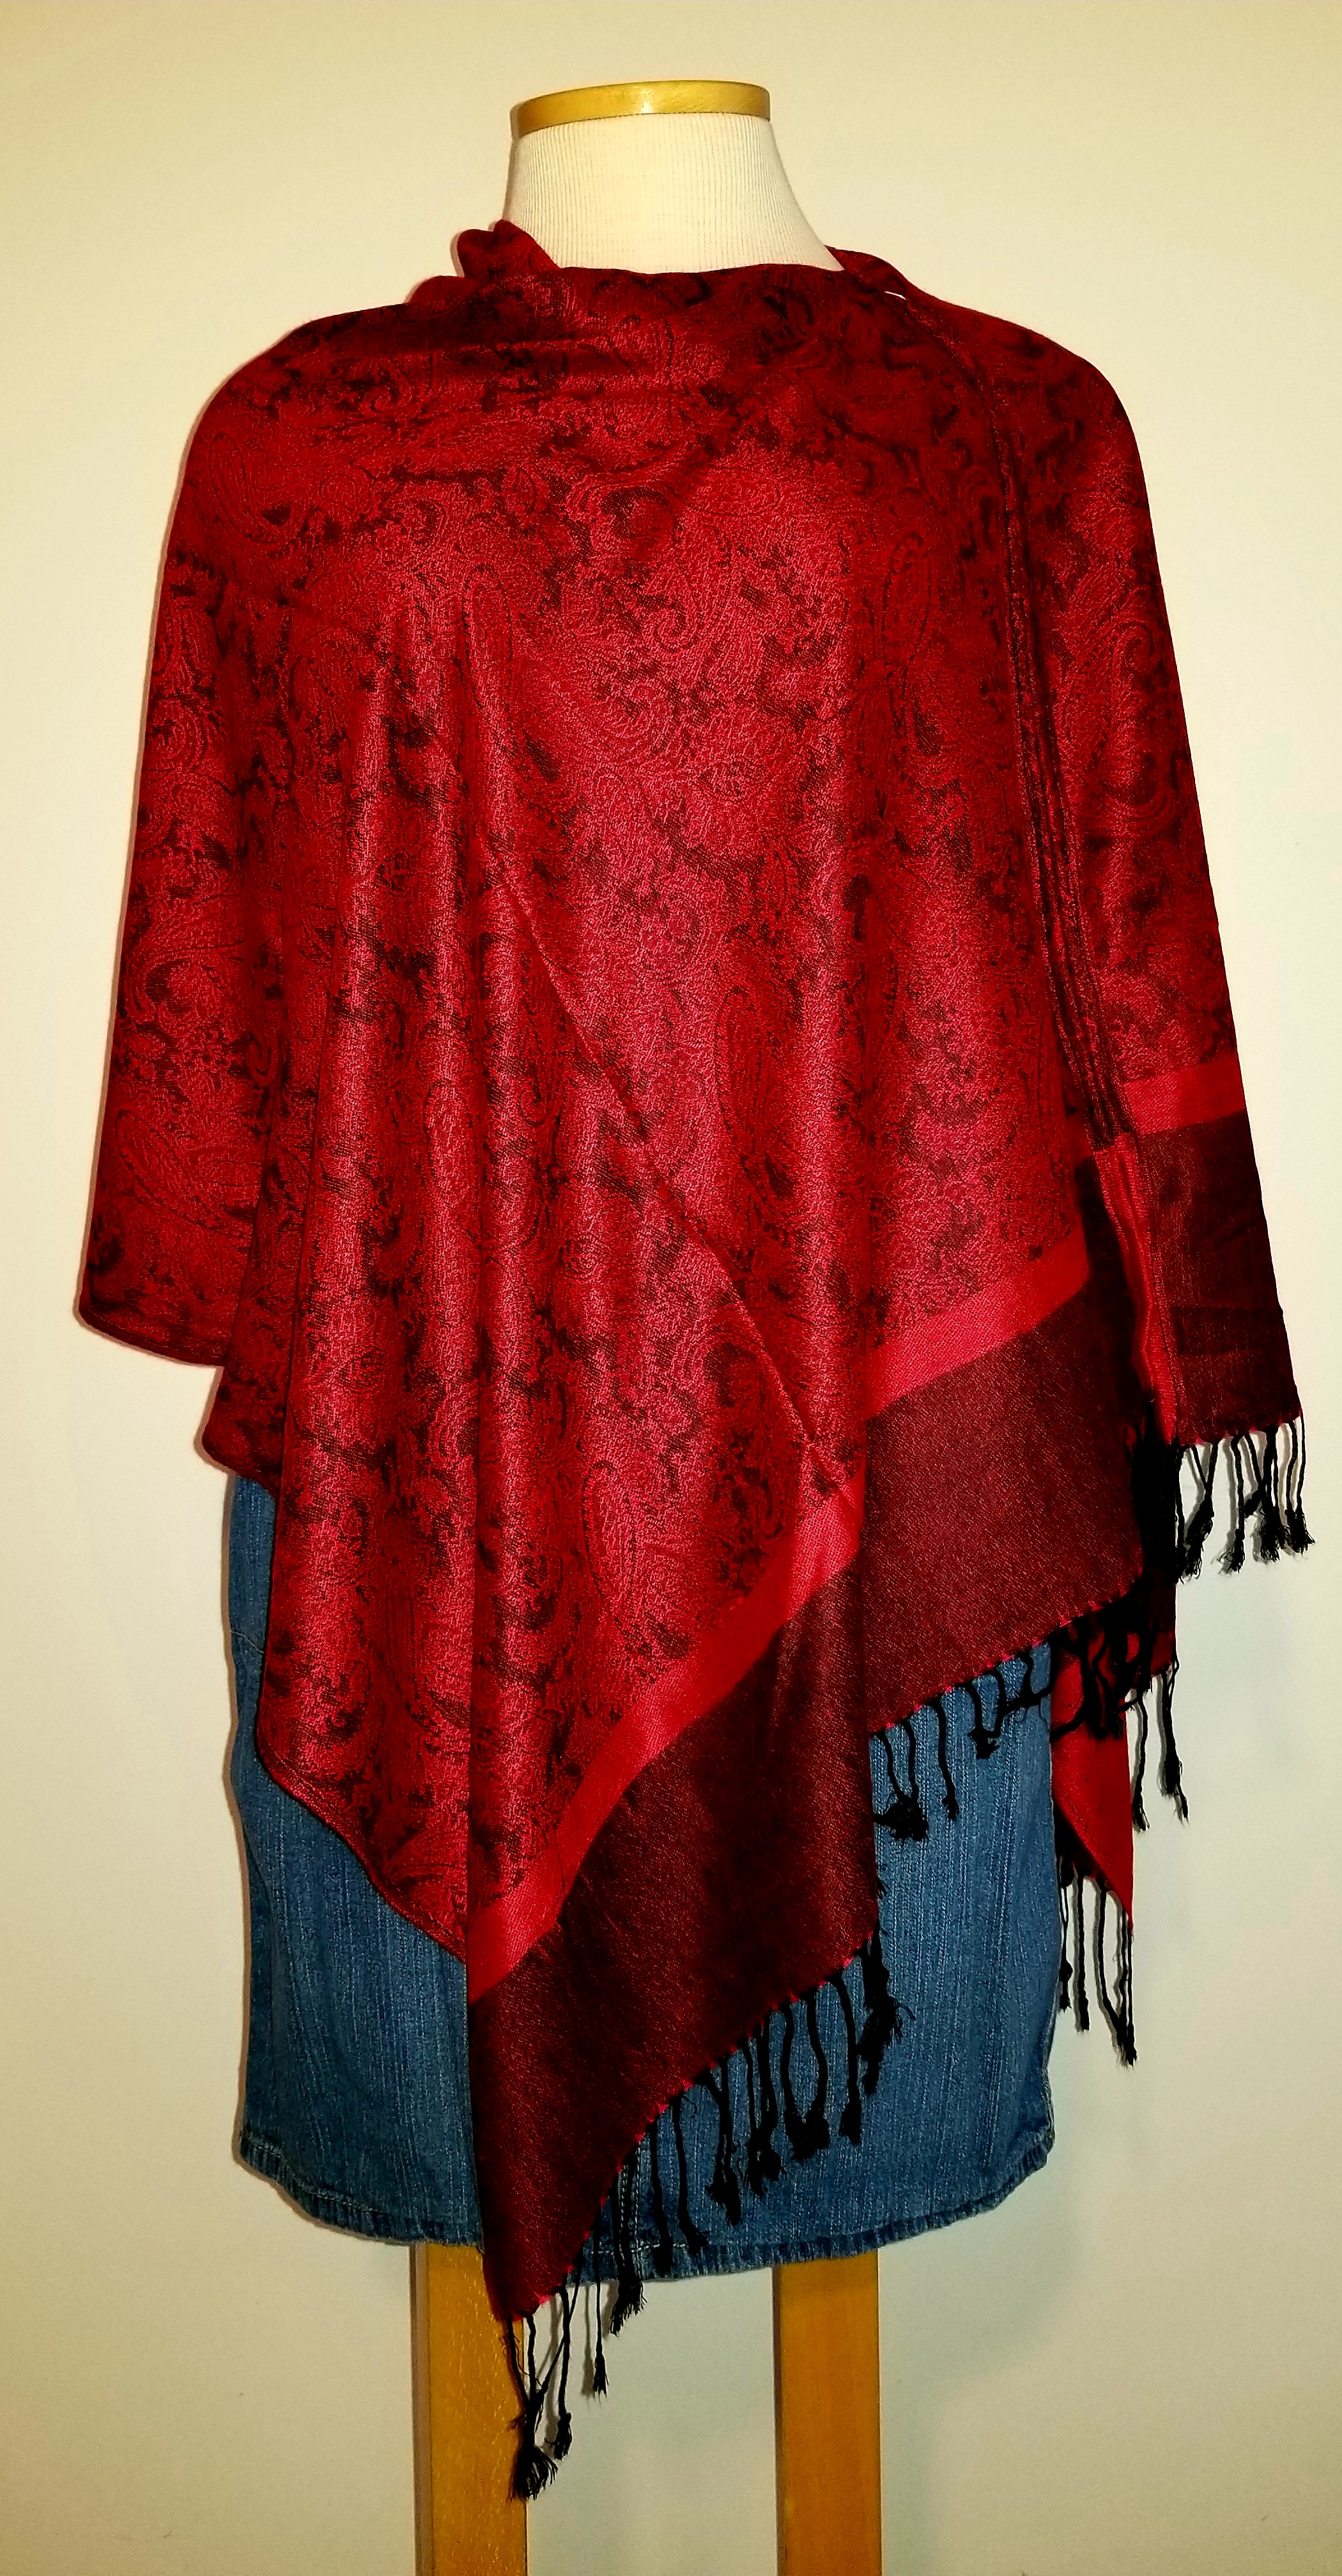 This Red / Black Paisley Reversible Popover Shawlmina Shawl- Silk Blend- Fits most is made with love by The Creative Soul Sisters! Shop more unique gift ideas today with Spots Initiatives, the best way to support creators.